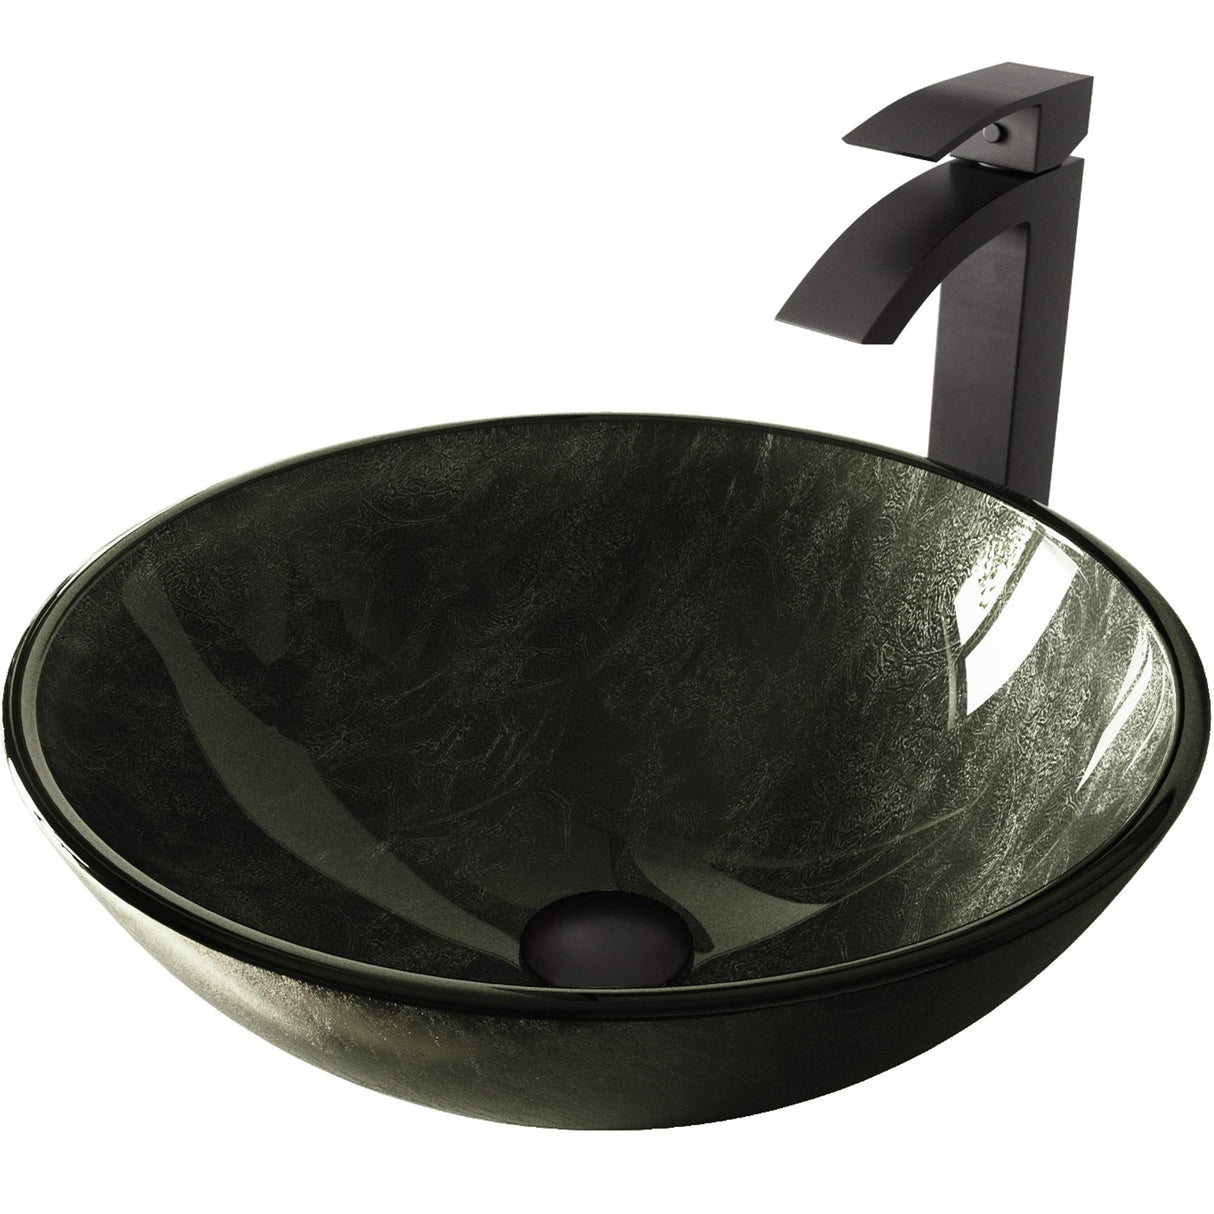 VIGO VGT572 16.5" L -16.5" W -12.0" H Gray Handmade Countertop Glass Round Vessel Bathroom Sink Set in Gray Onyx Finish with Matte Black Single-Handle Single Hole Faucet and Pop Up Drain